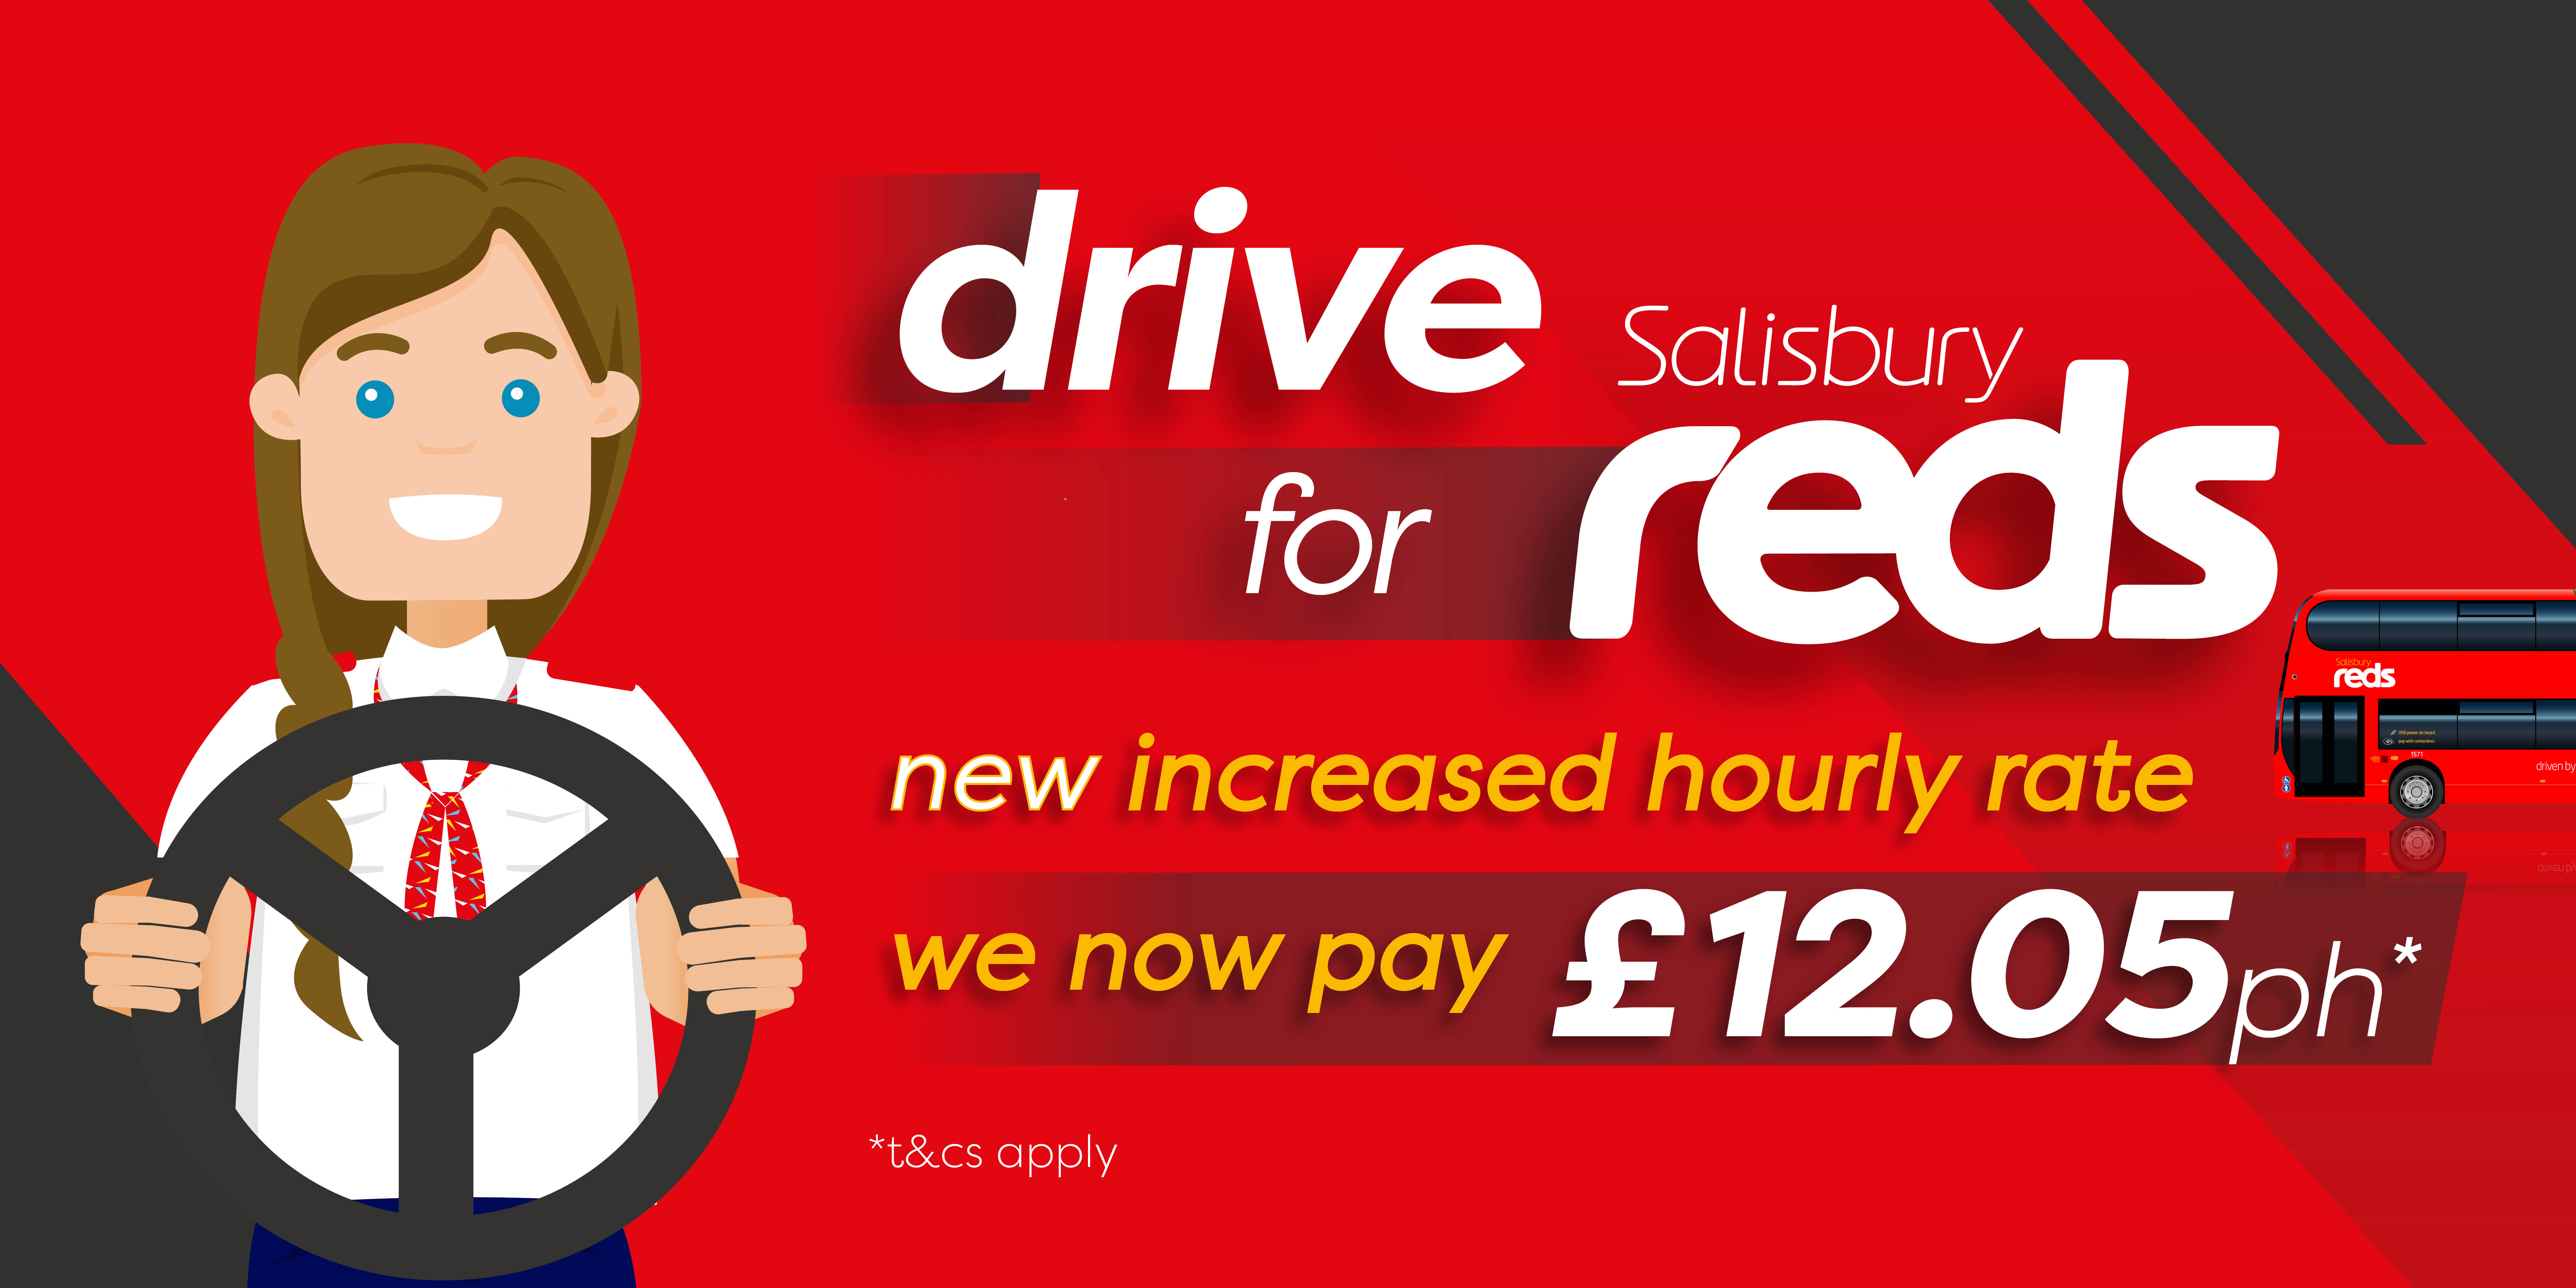 New hourly rate of pay increase advert